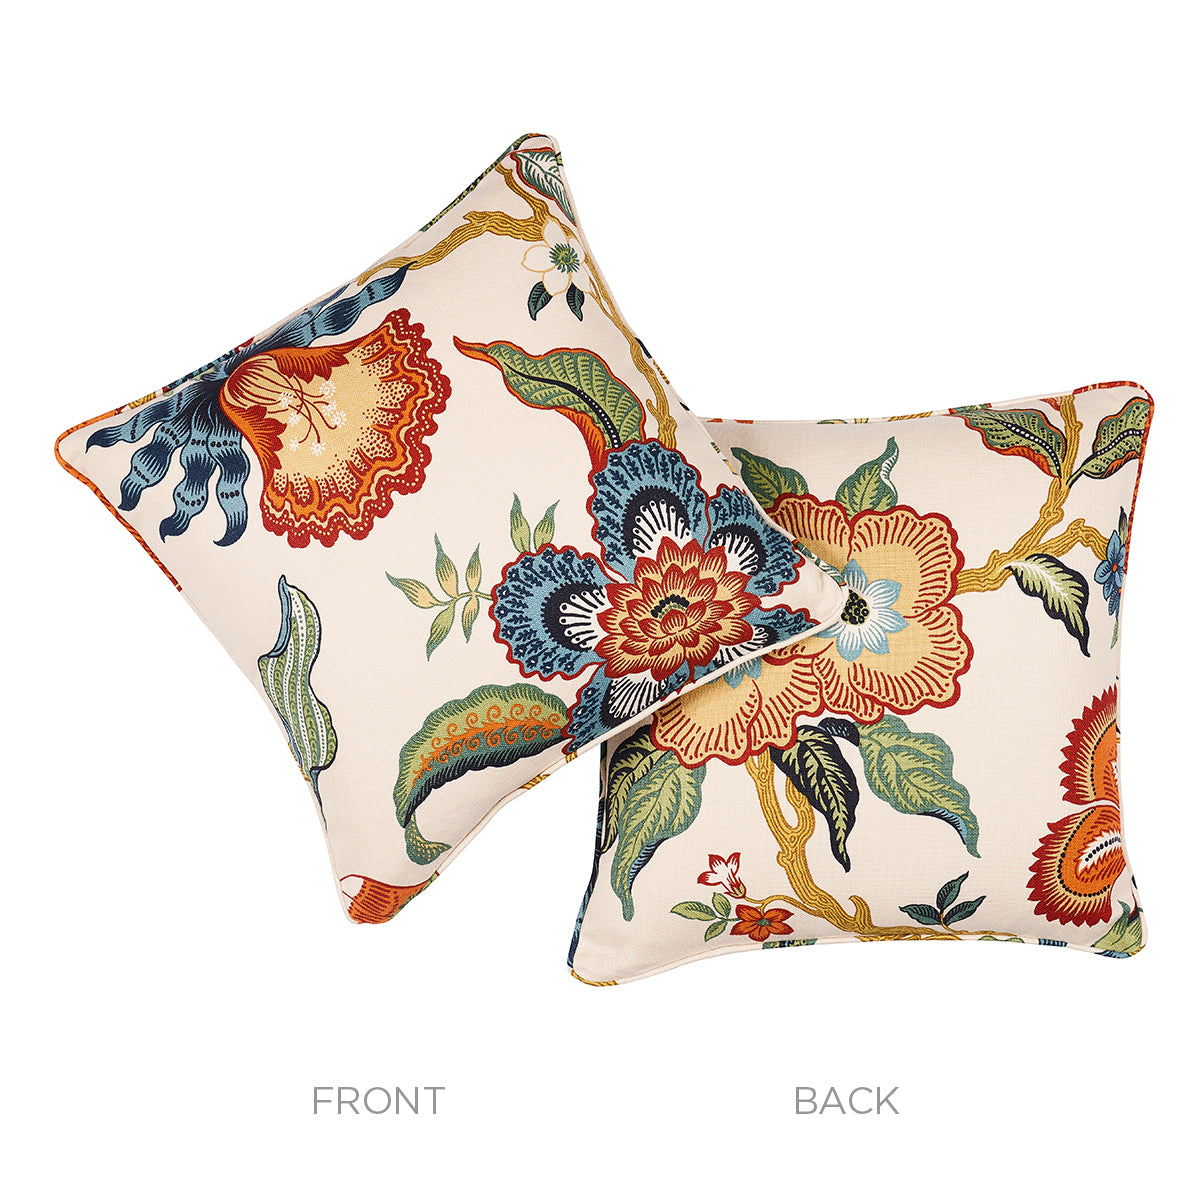 Hothouse Flowers Pillow | Spark